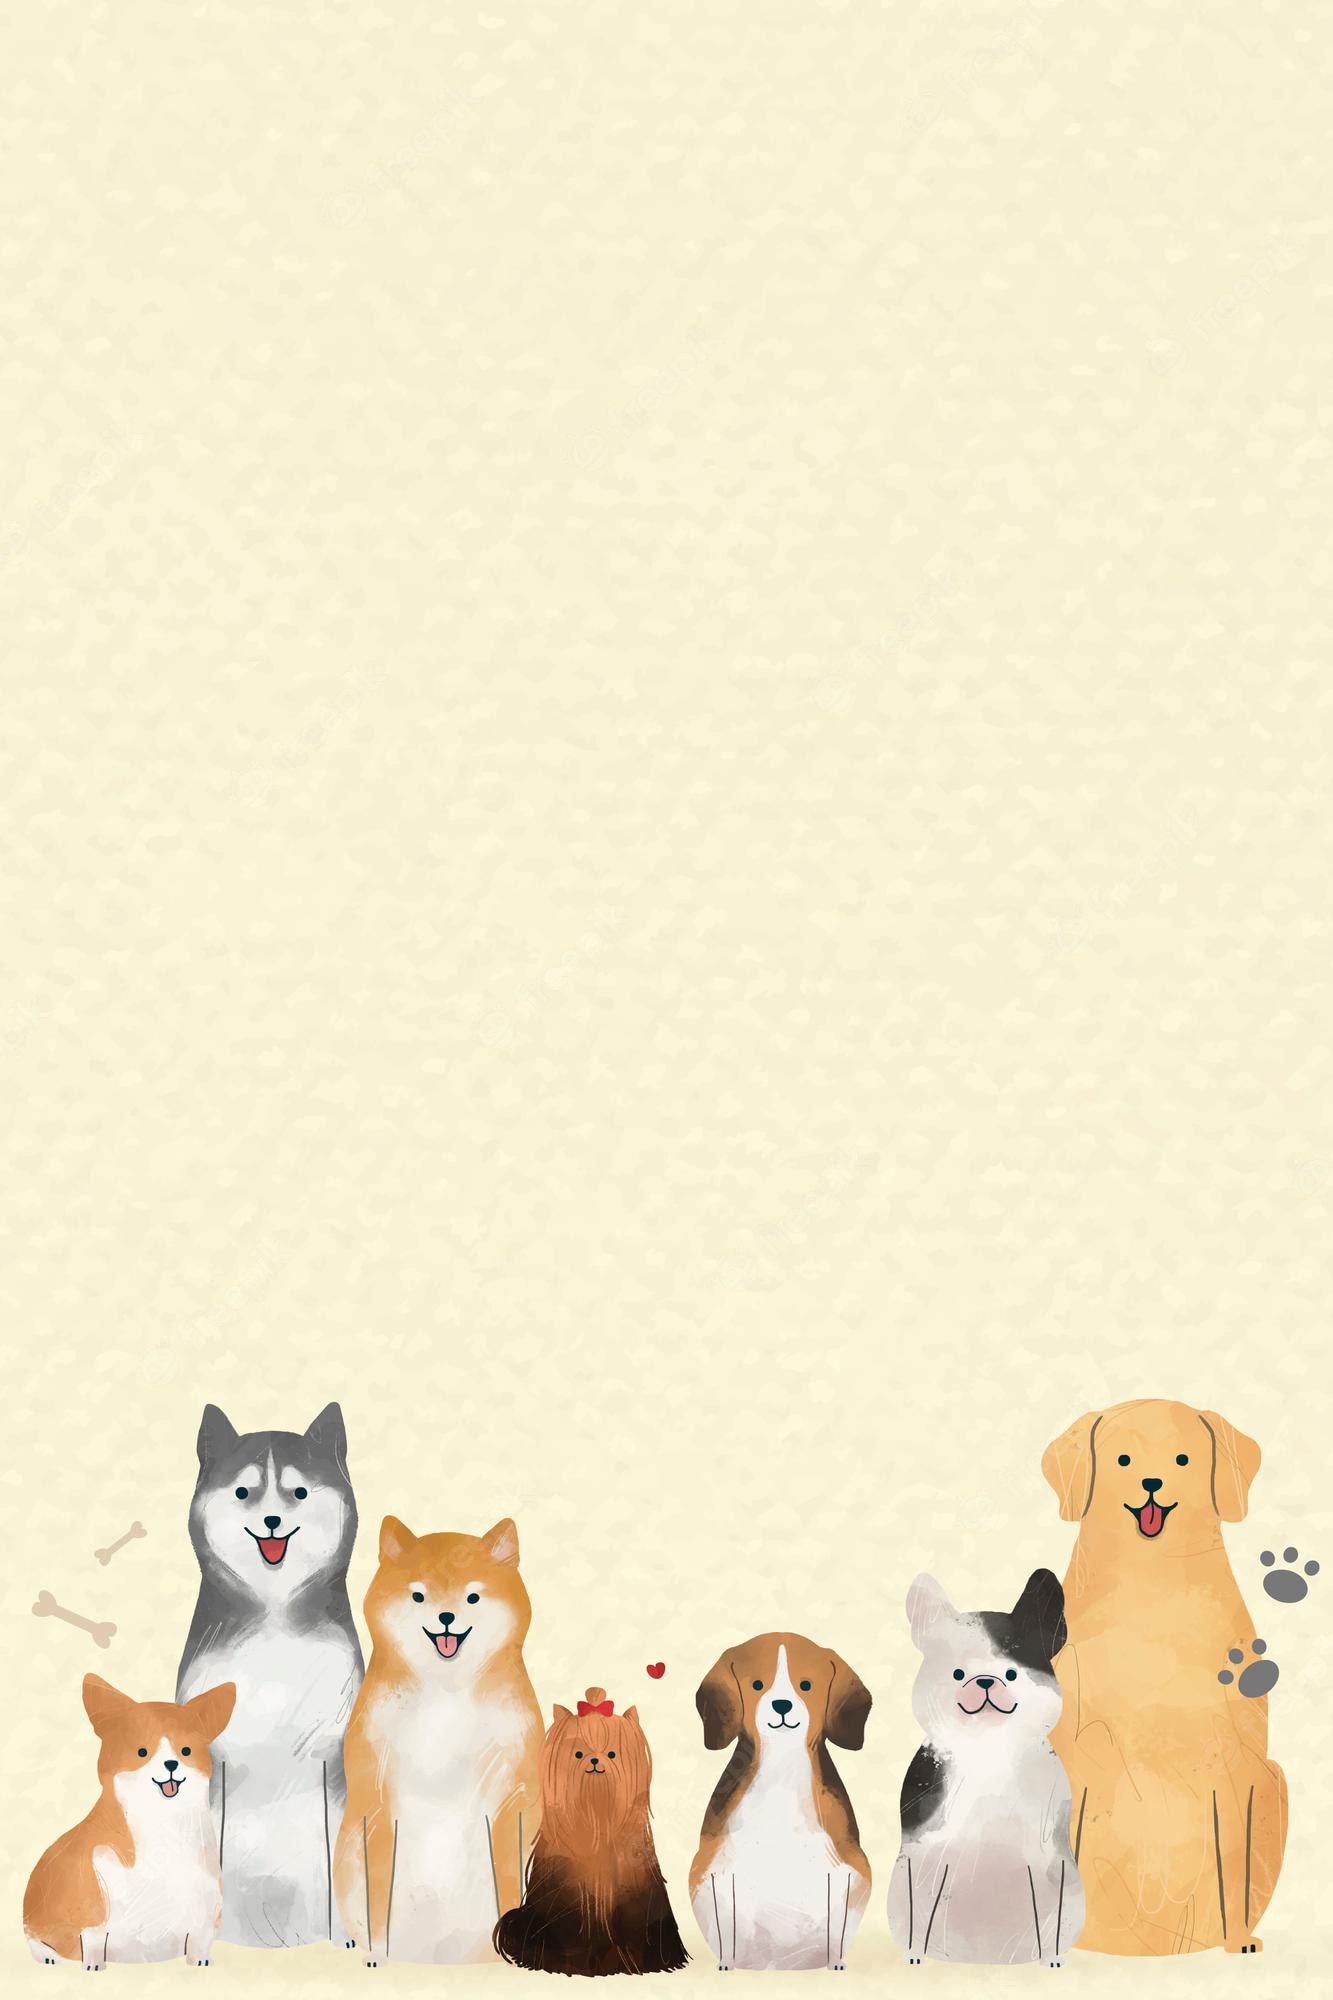 Free Vector. Dog background with cute pets illustration